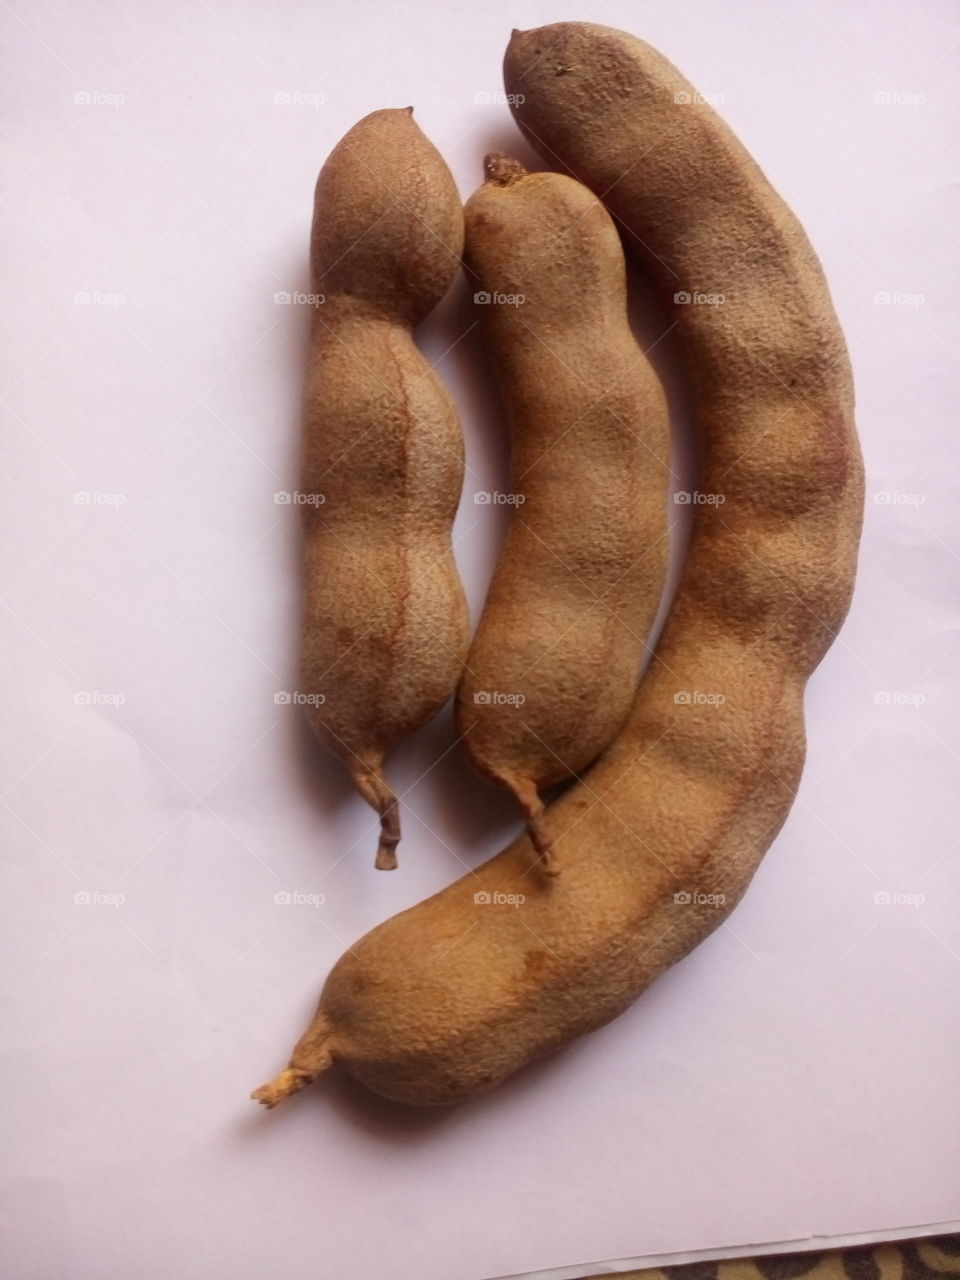 Tamarind  - (Tamarindus indica) is a leguminous tree in the family Fabaceae ... that it is sometimes reported to be indigenous there, where it is known as imli in Hindi-Urdu. 